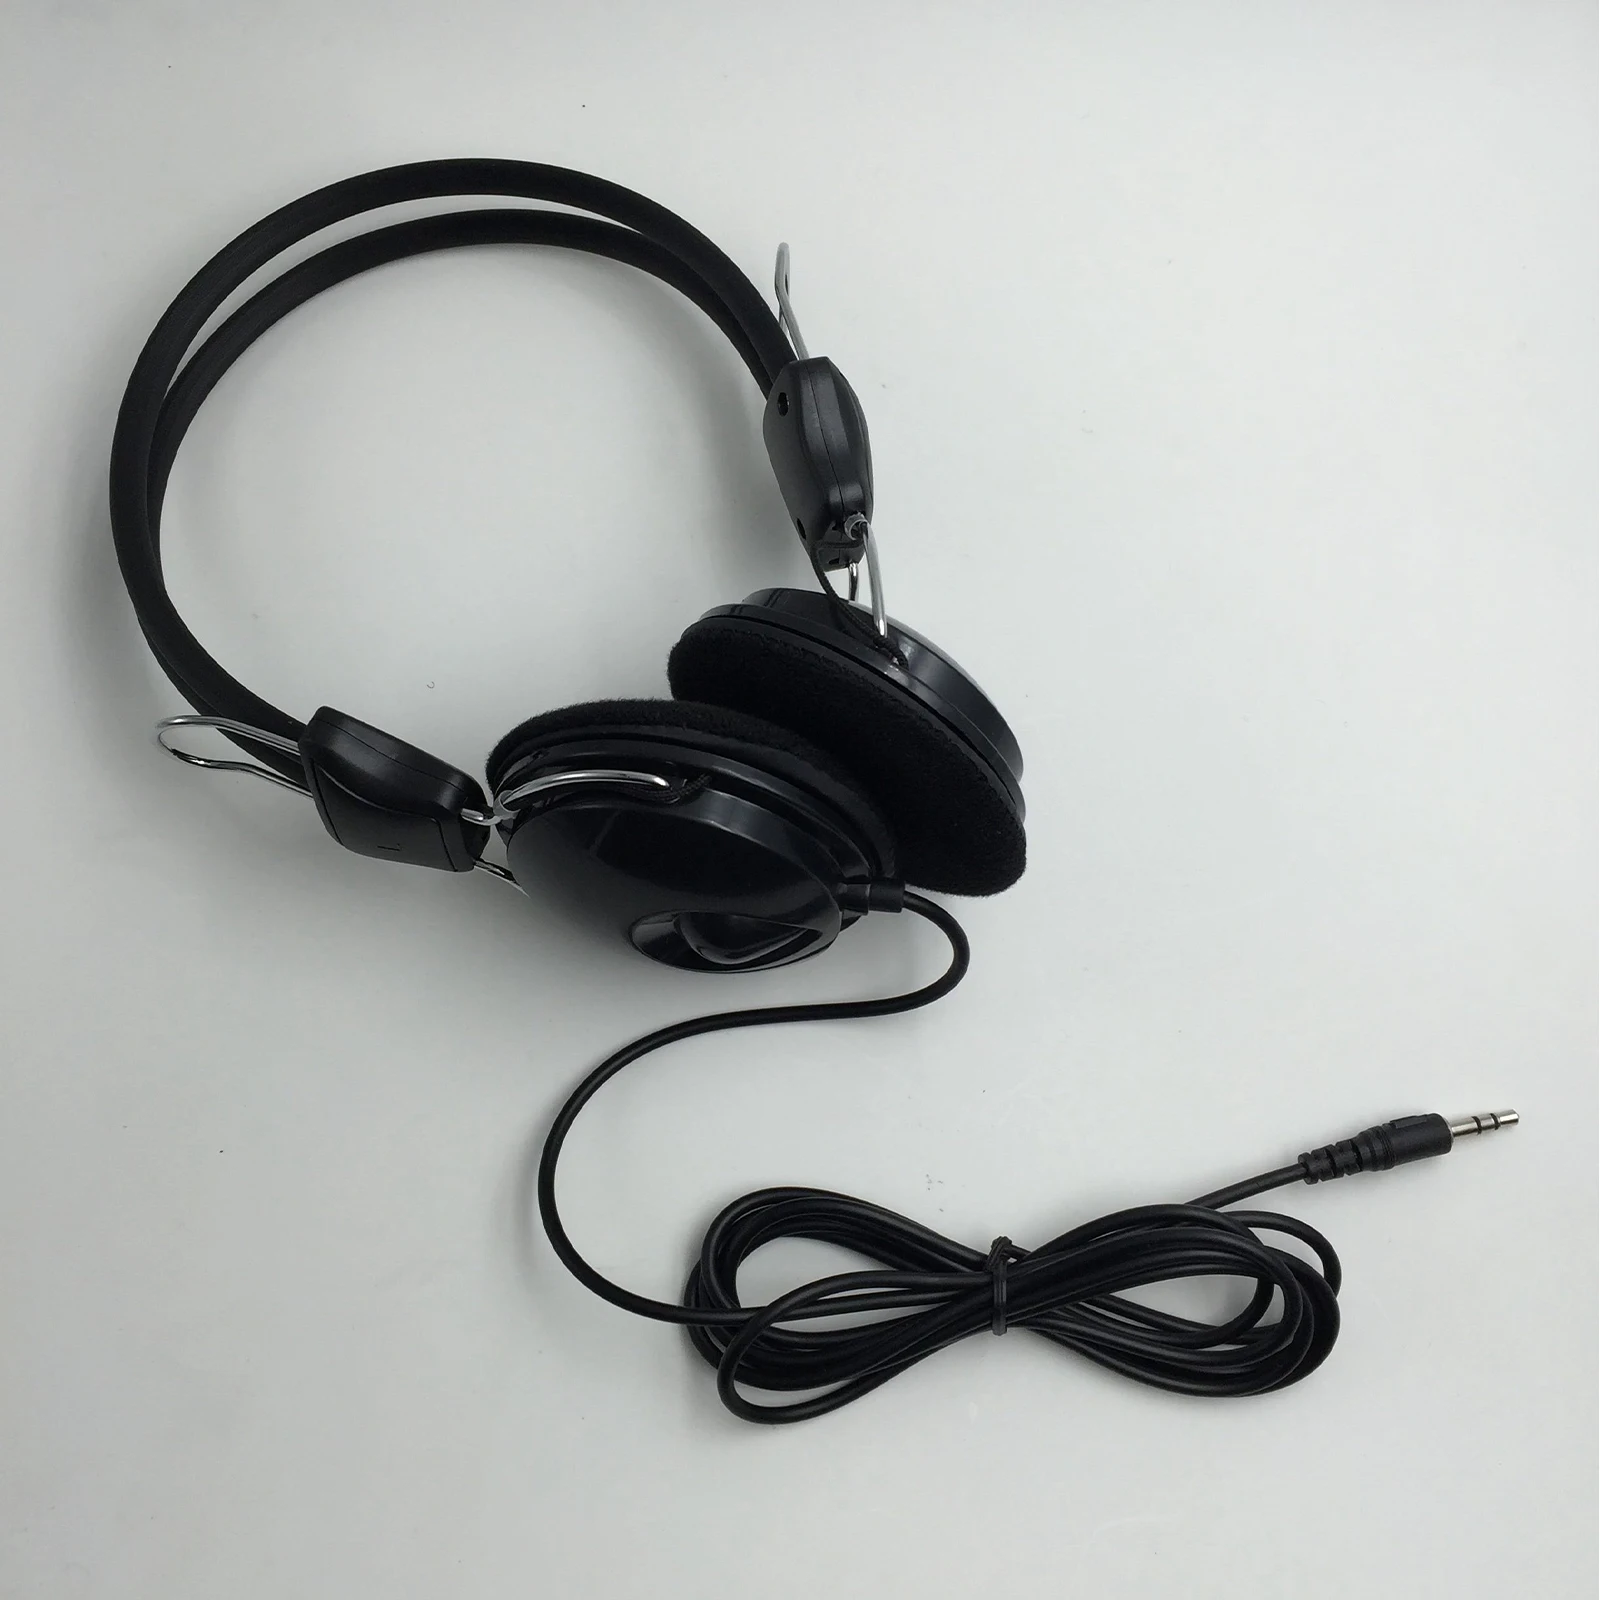 Black Headphones w/ Wire & Ear Cushion, for Metal Detectors Use, Portable and Lightweight